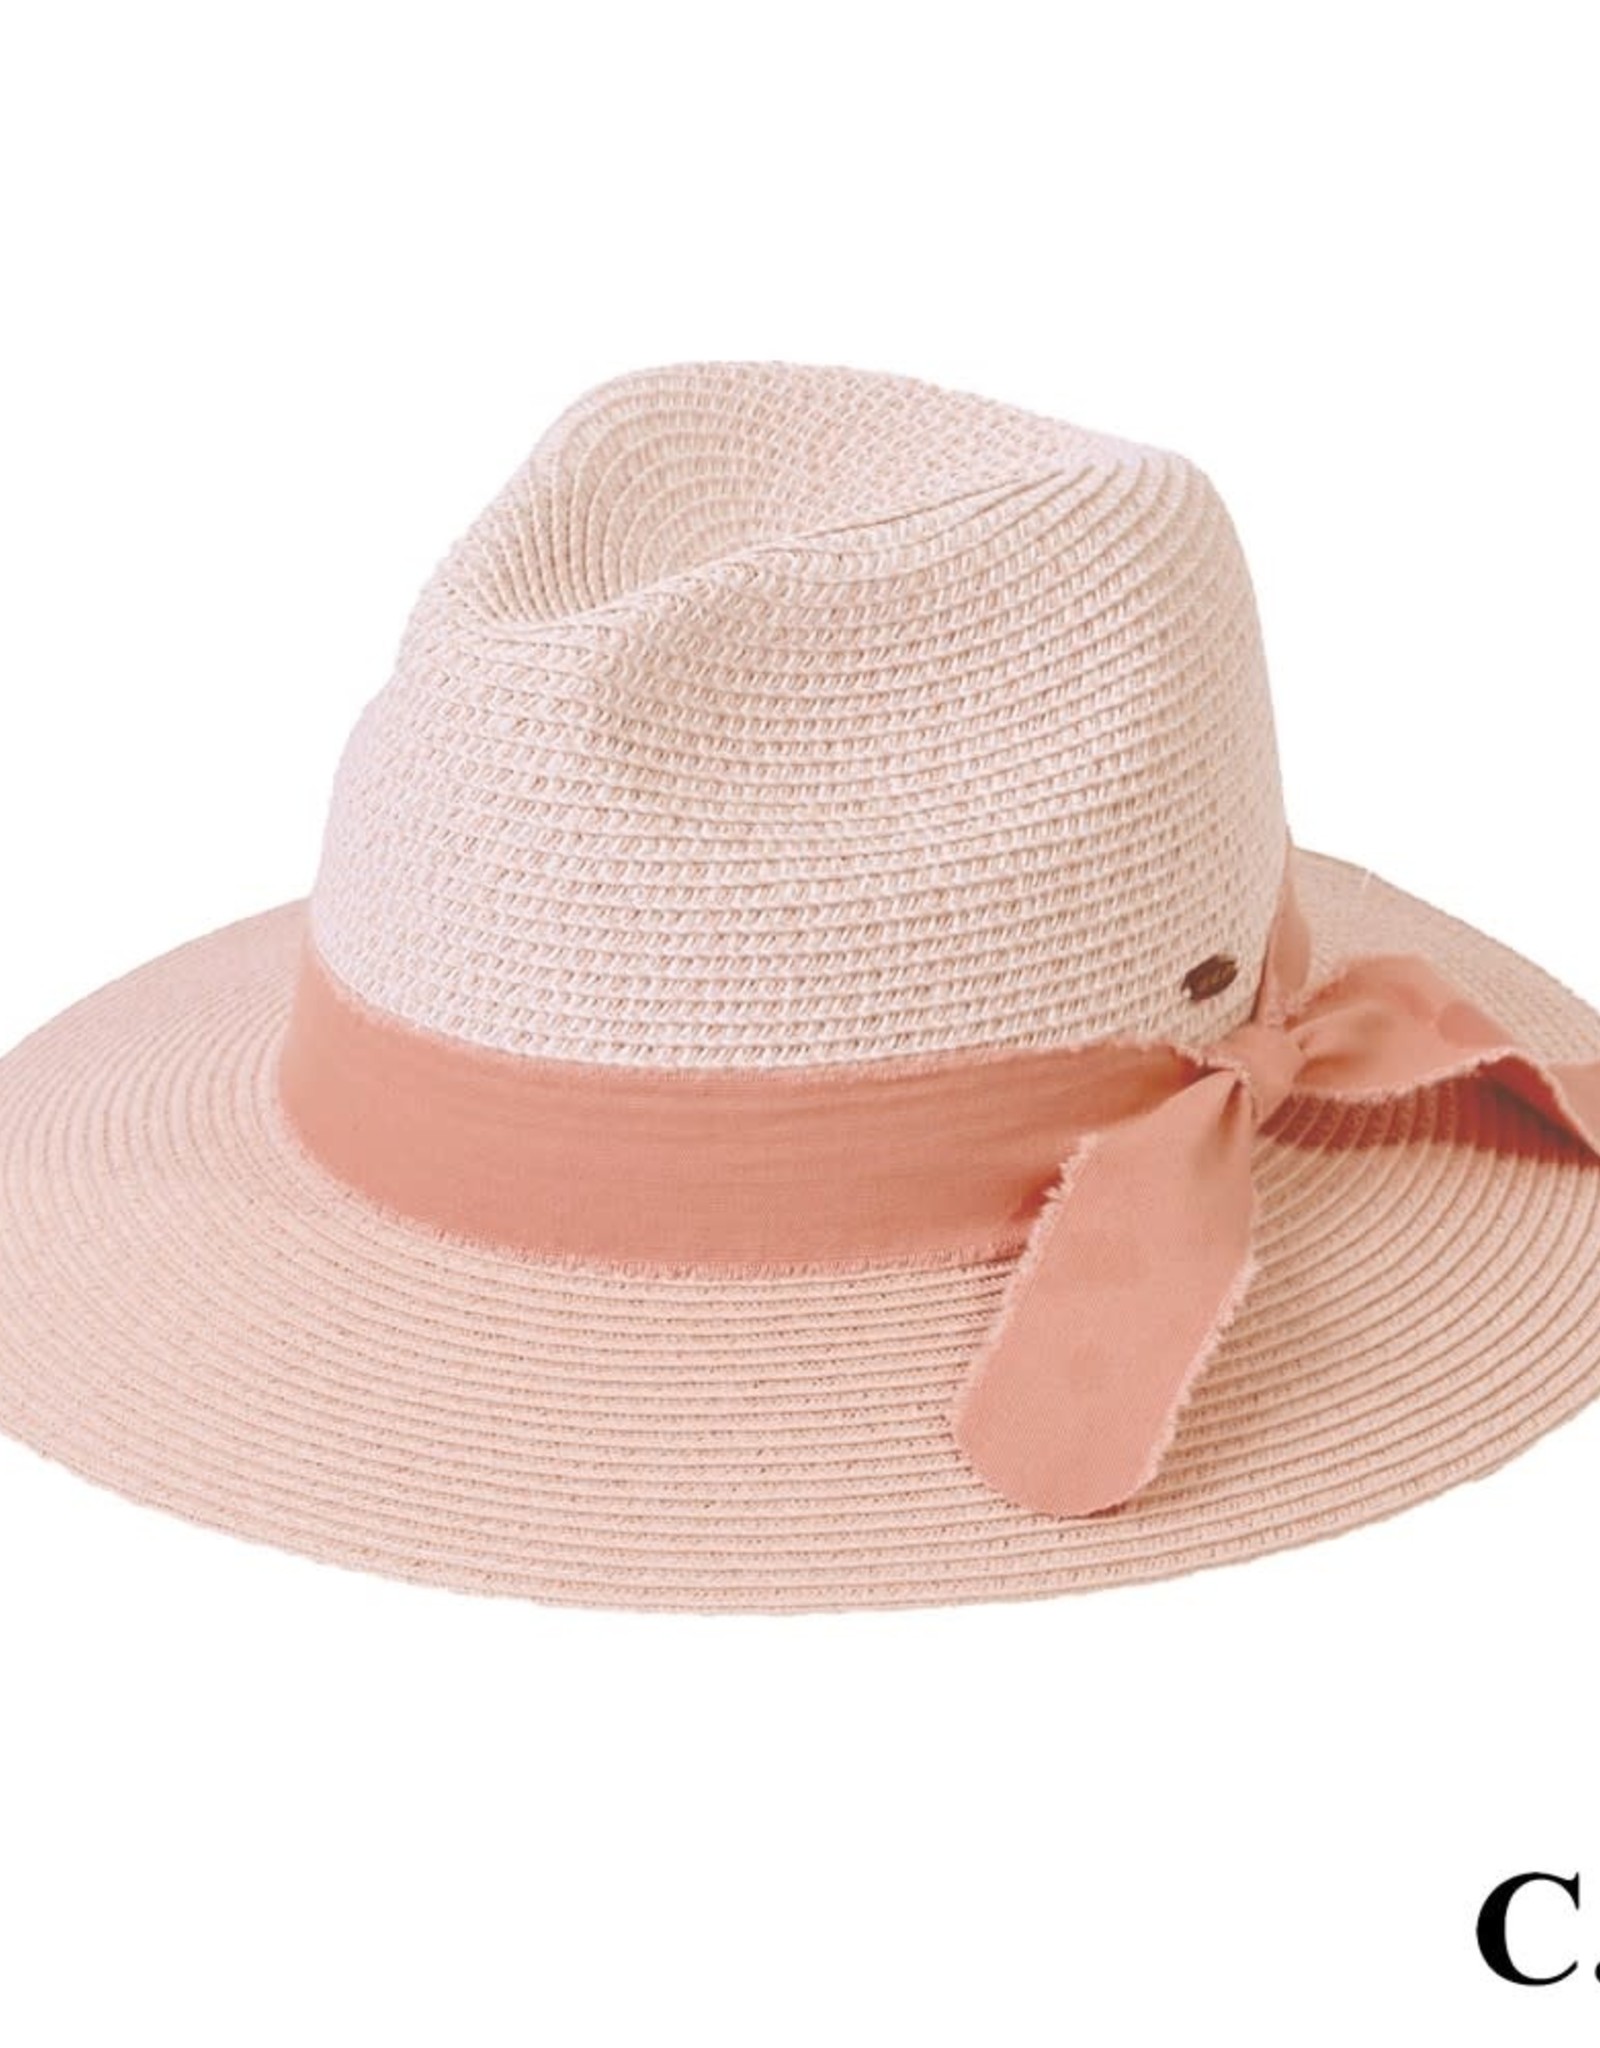 judson 729243 - C.C Panama Hat With Frayed Bow - Pink